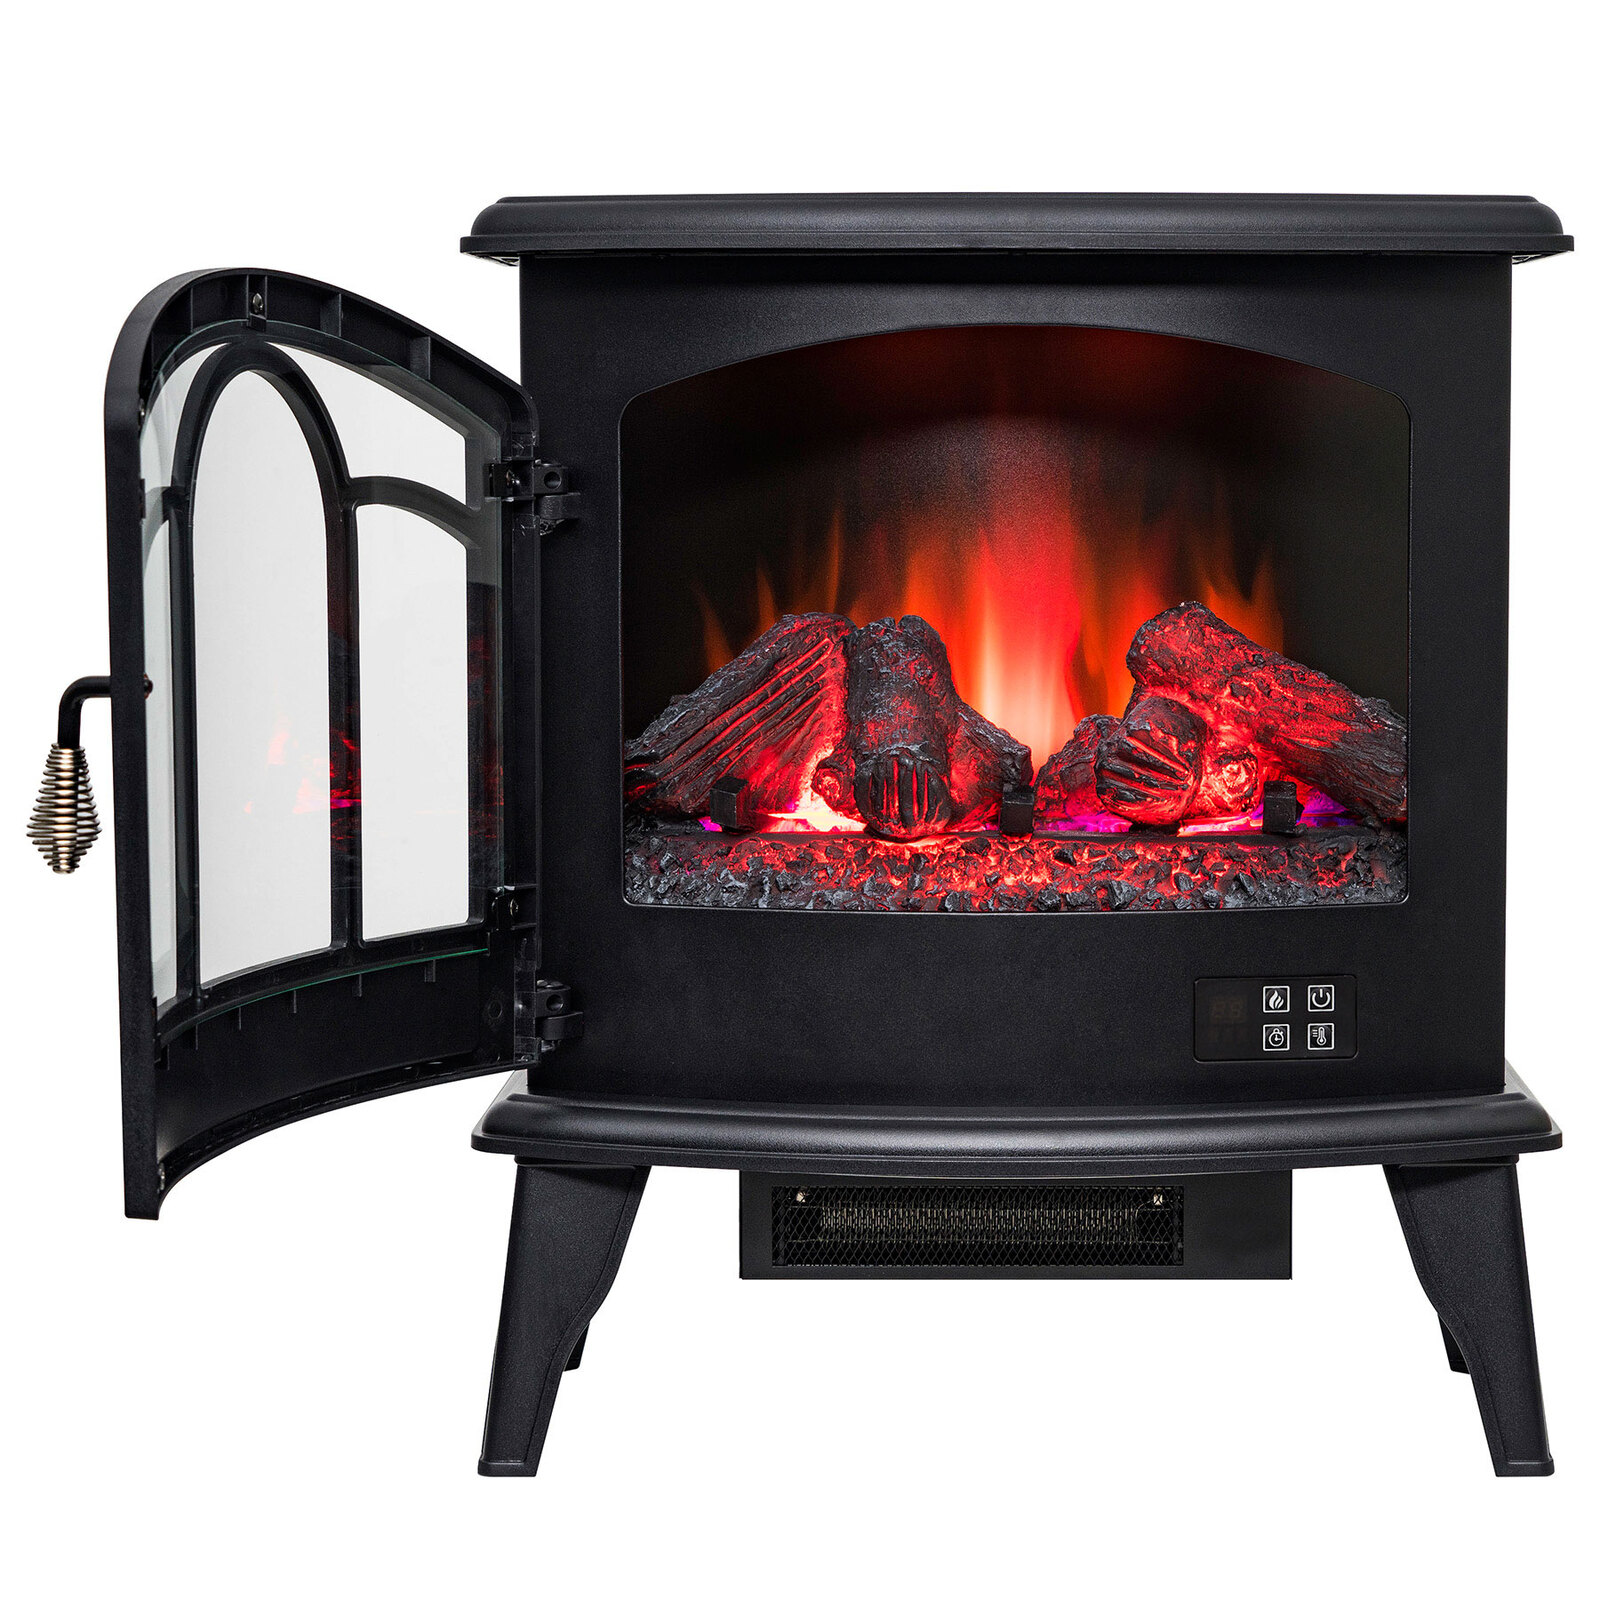 Freestanding 3 Sided Electric Log Stove Fireplace Heater